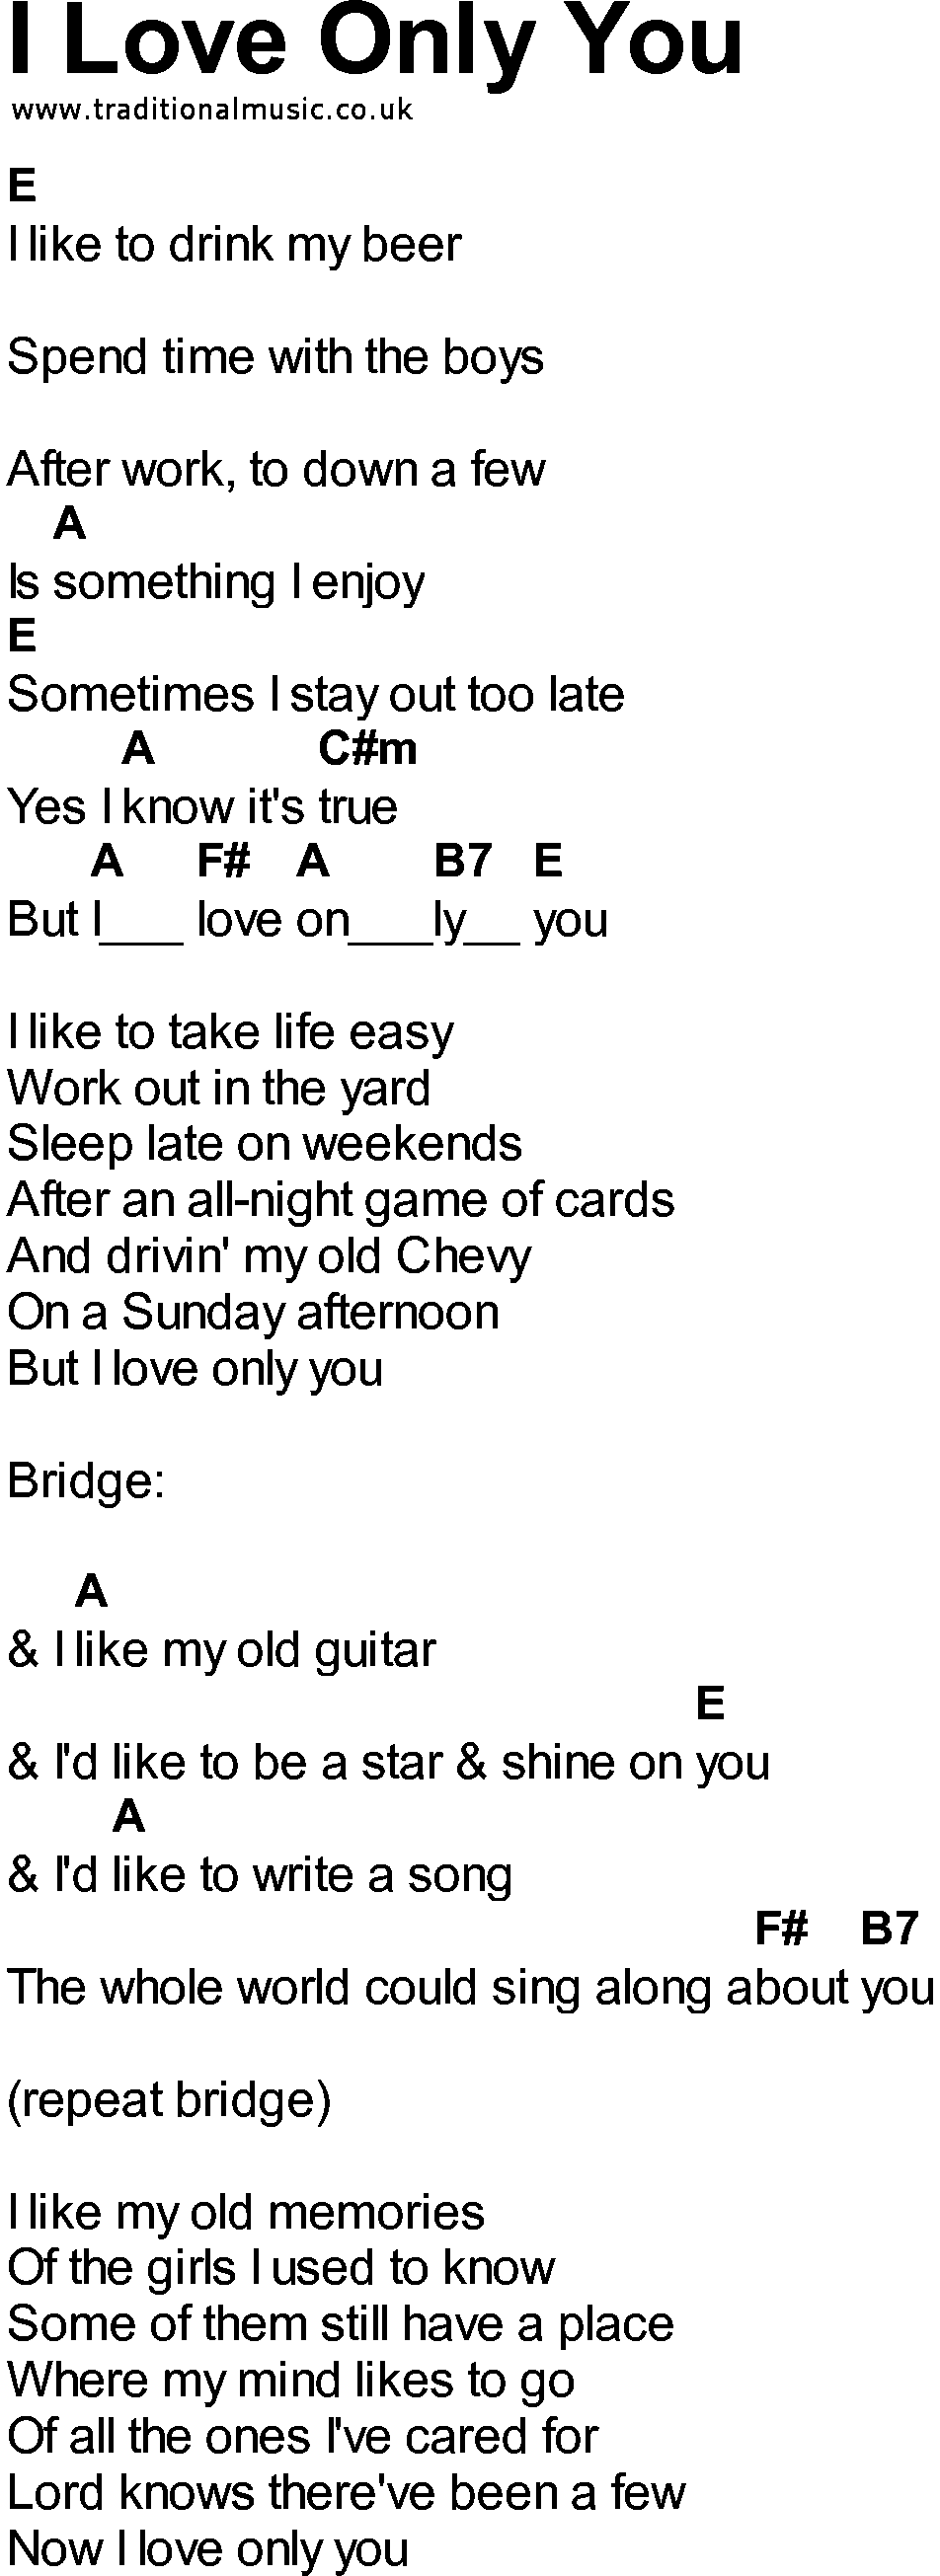 Bluegrass songs with chords - I Love Only You